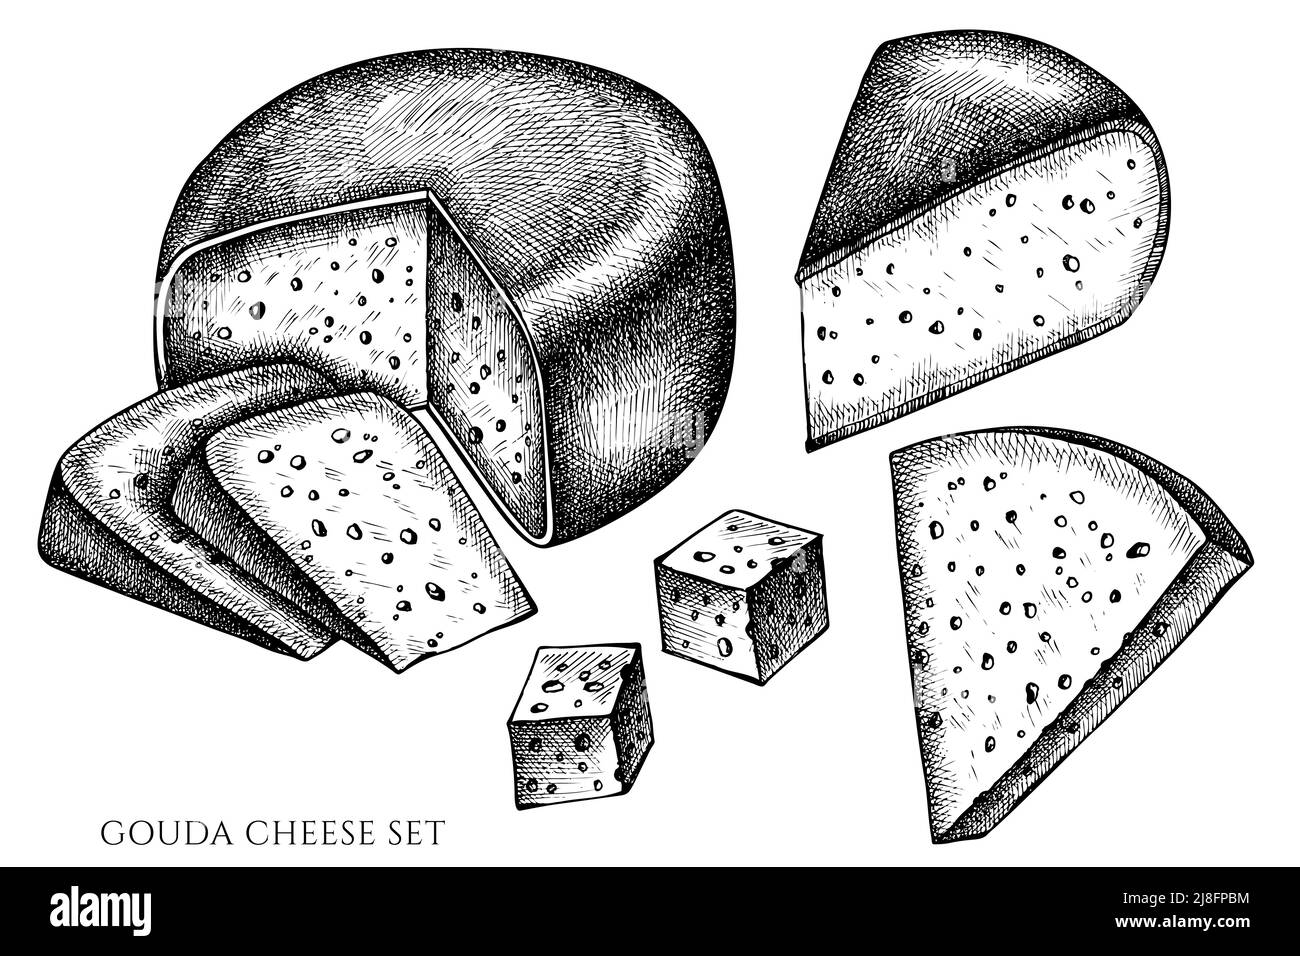 Cheese vintage vector illustrations collection. Black and white gouda cheese. Stock Vector